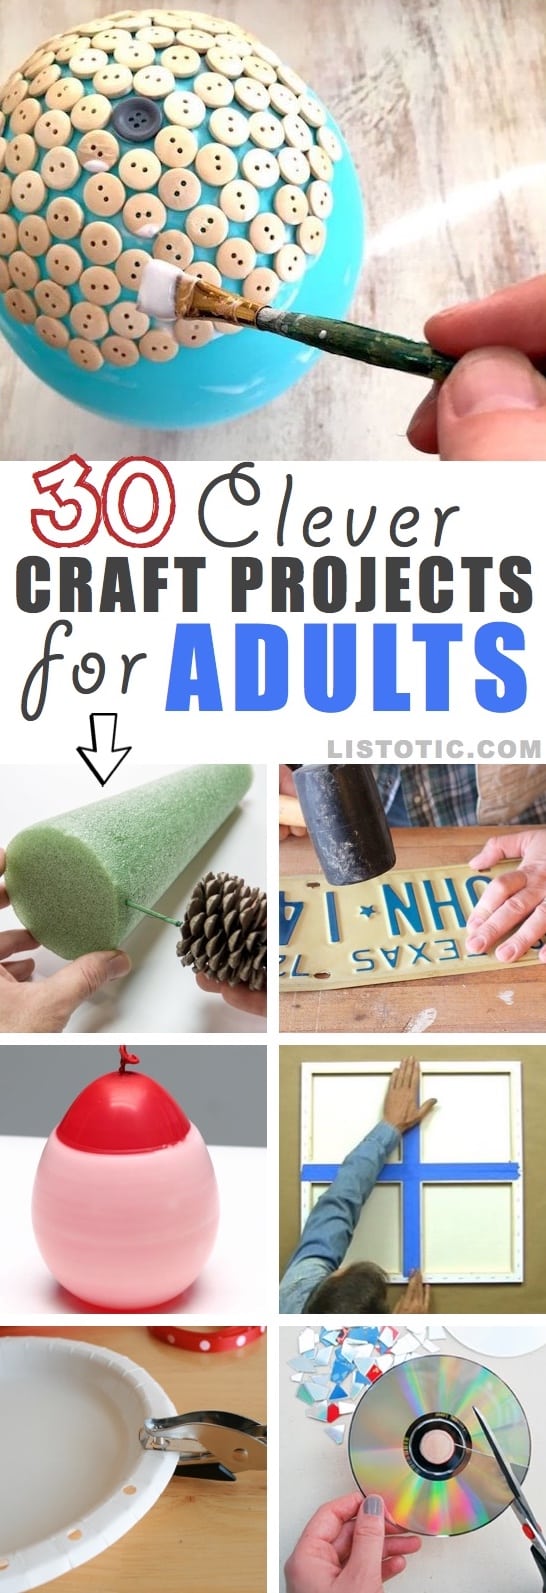 Craft Ideas For S That Will Spark